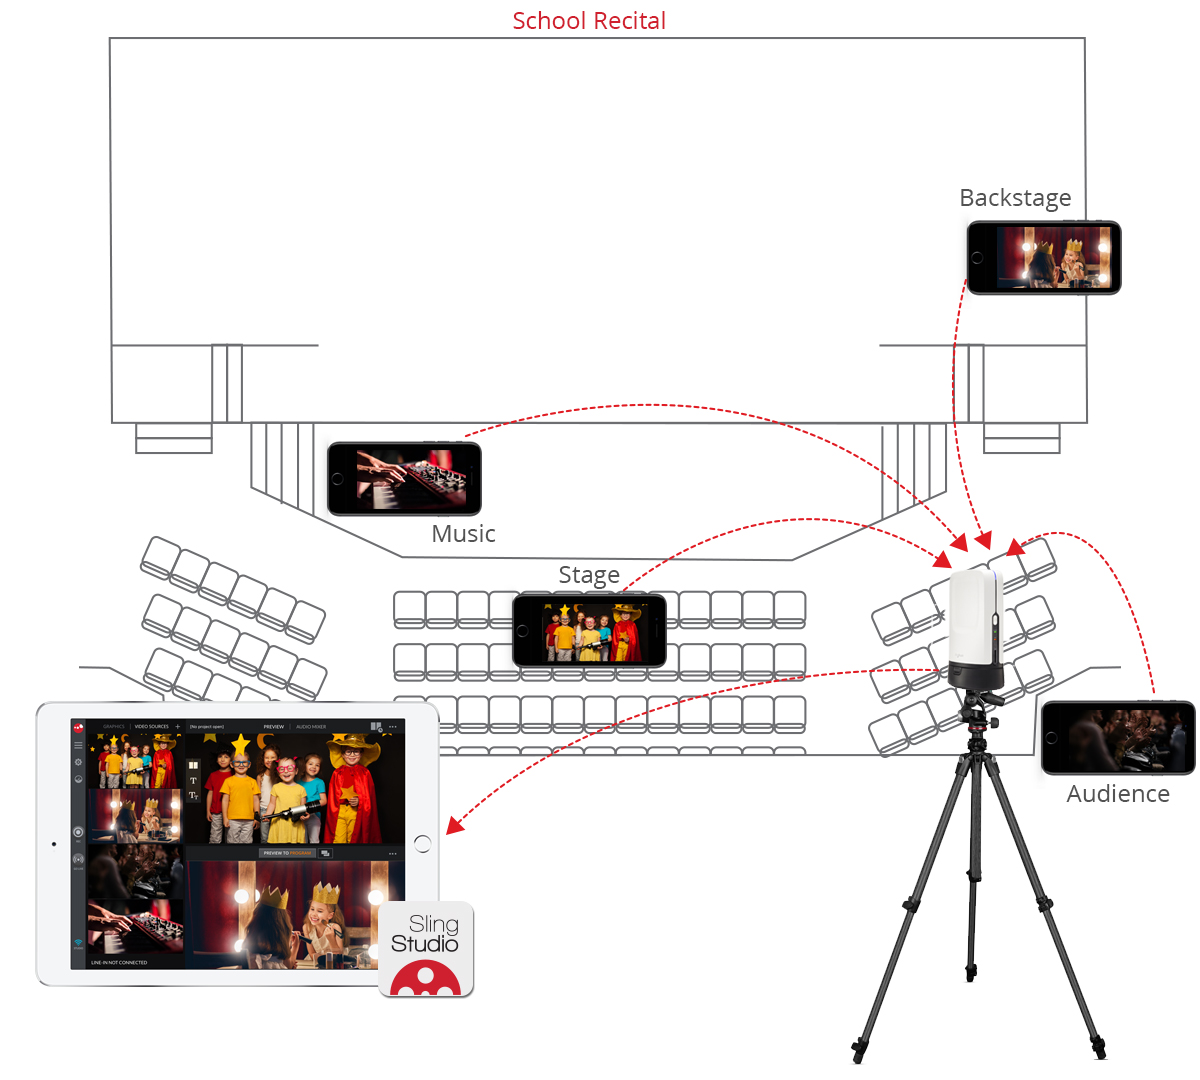 Diagram on how to live stream                                                                      school events such as plays, concerts and assemblies with SlingStudio                                                                       video switcher